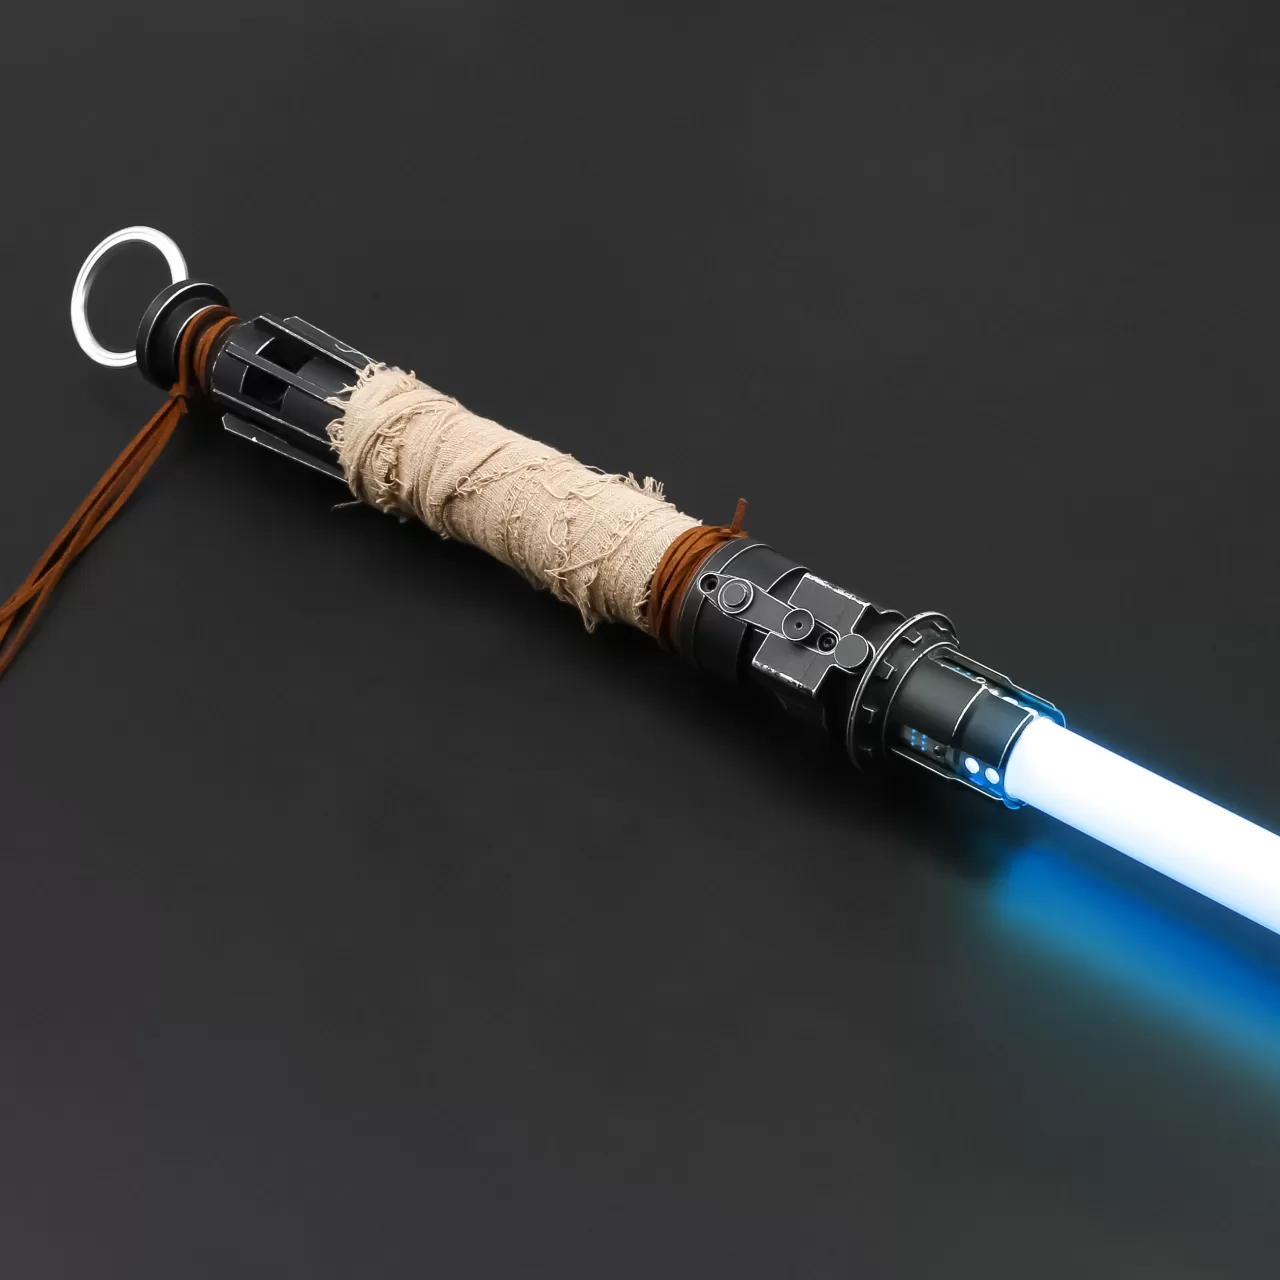 Lightsaber Company, DynamicSabers, is Pushing the Limits of Saber Design